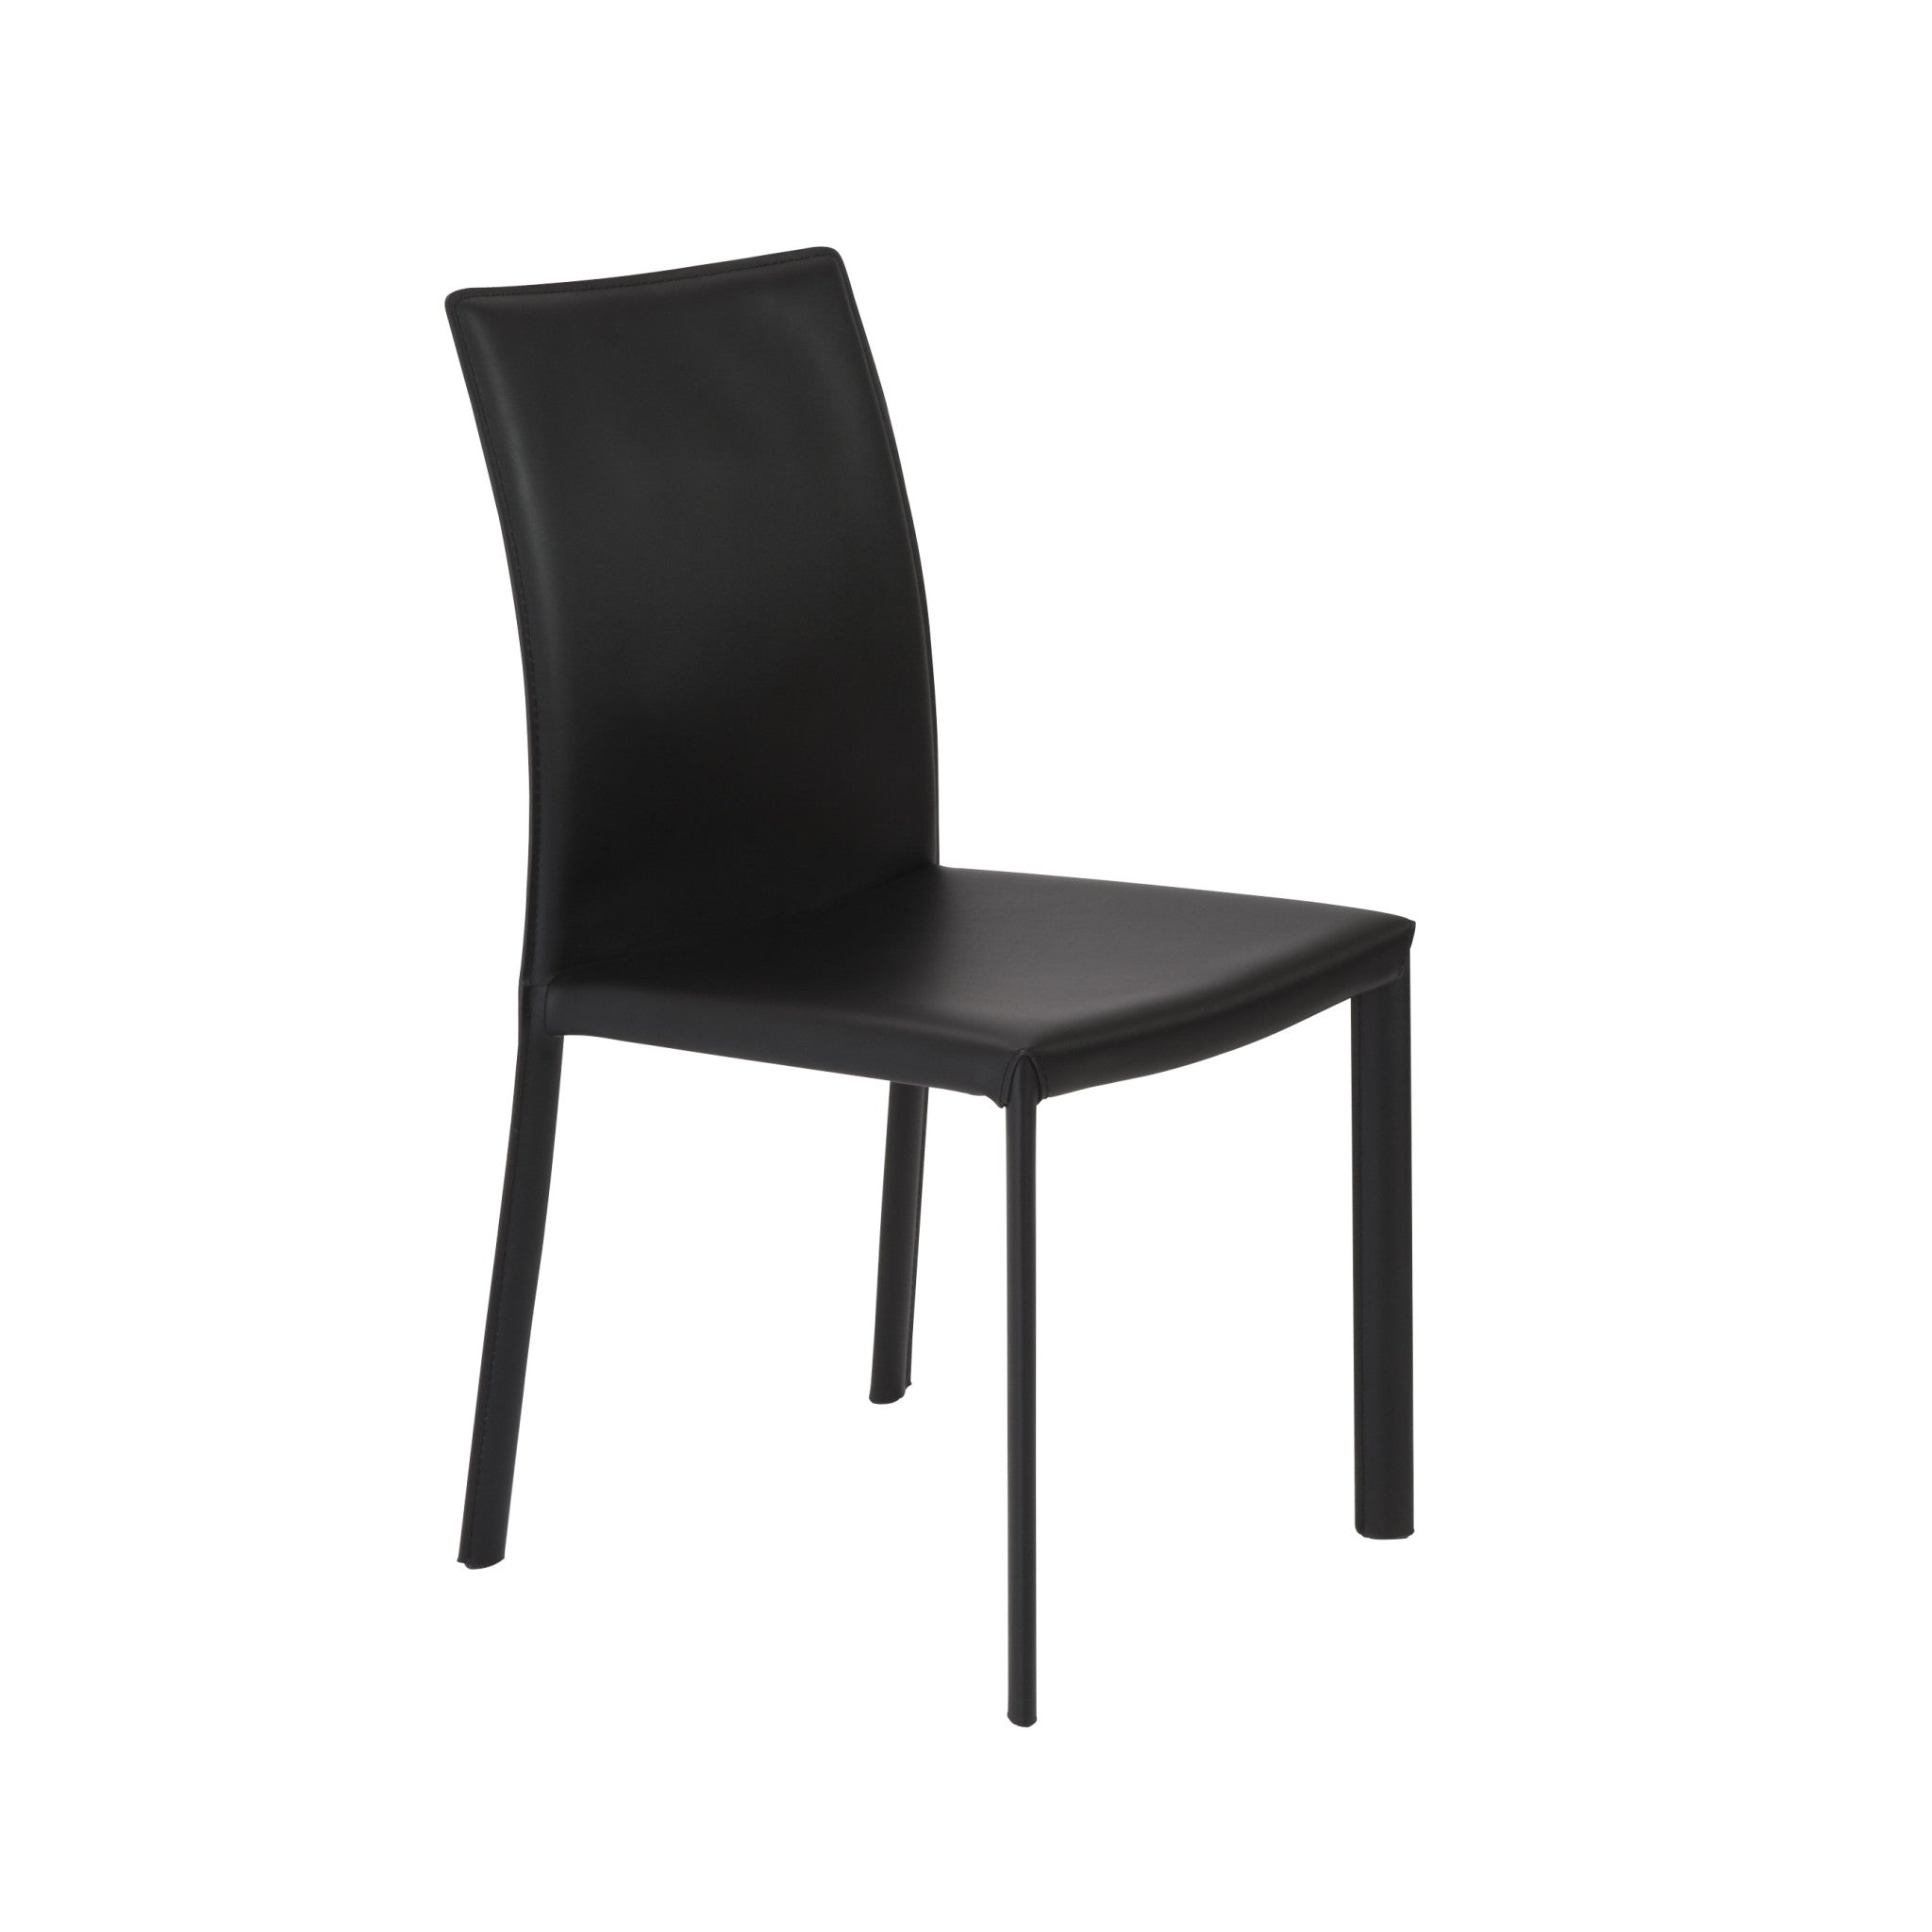 Set of Two Black Upholstered Leather Dining Side Chairs